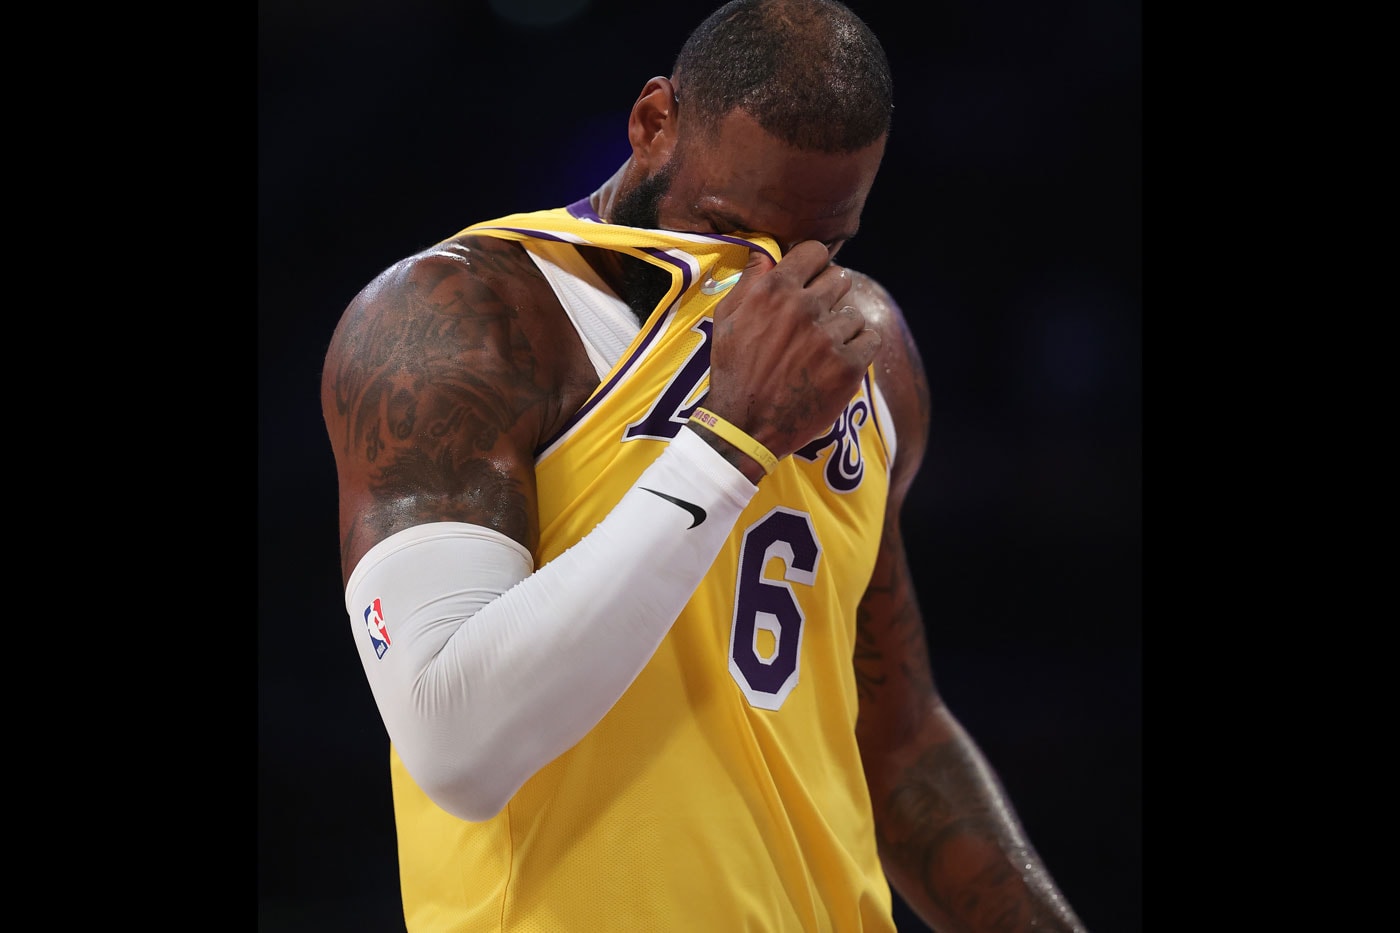 LeBron James Is Out With Abdominal Injury NBA los angeles lakers anthony davis basketball russell westbrook injuries